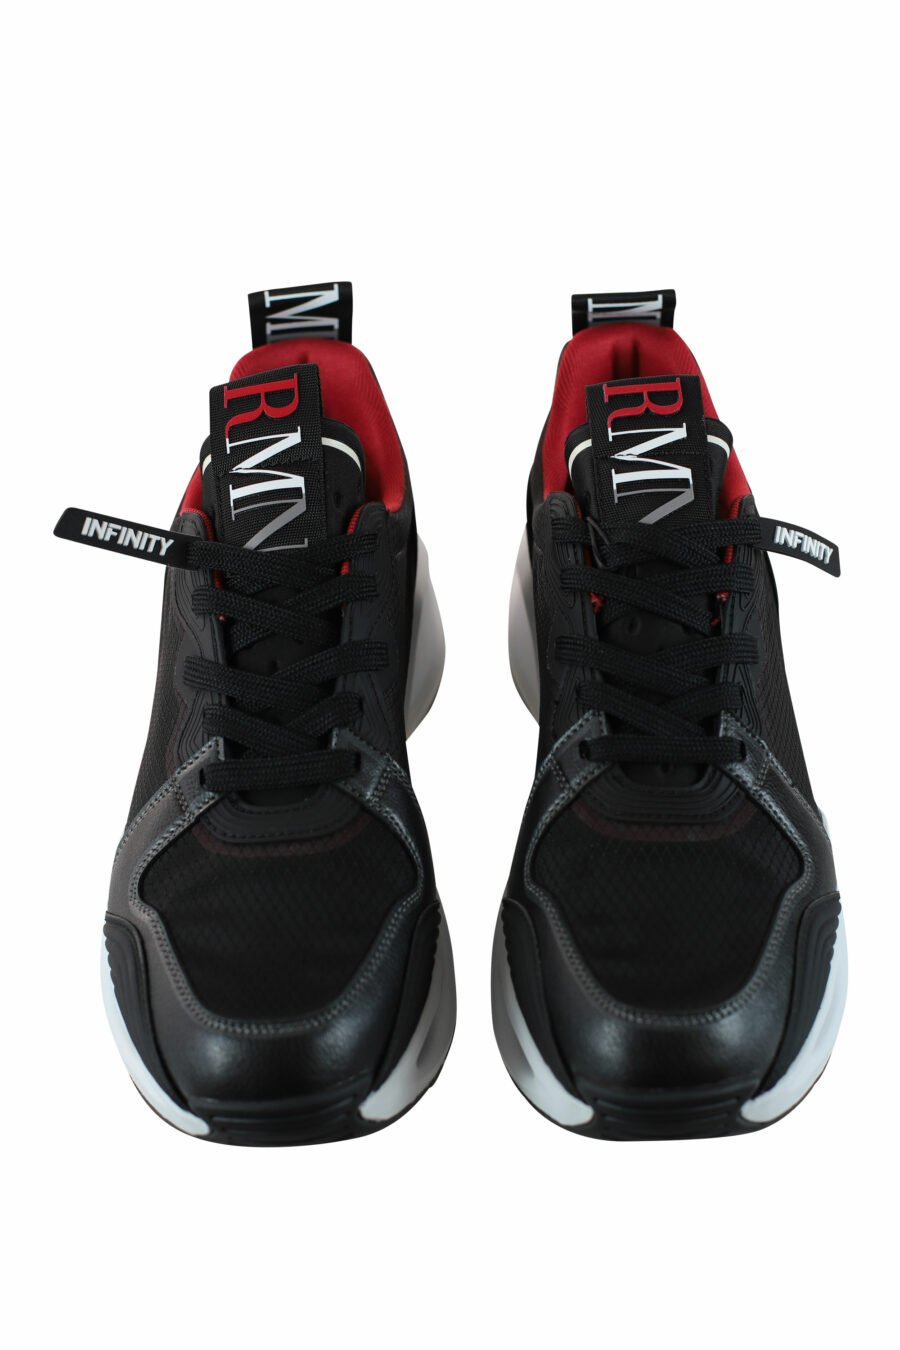 Black trainers with red details "infinity evolution" - IMG 4360